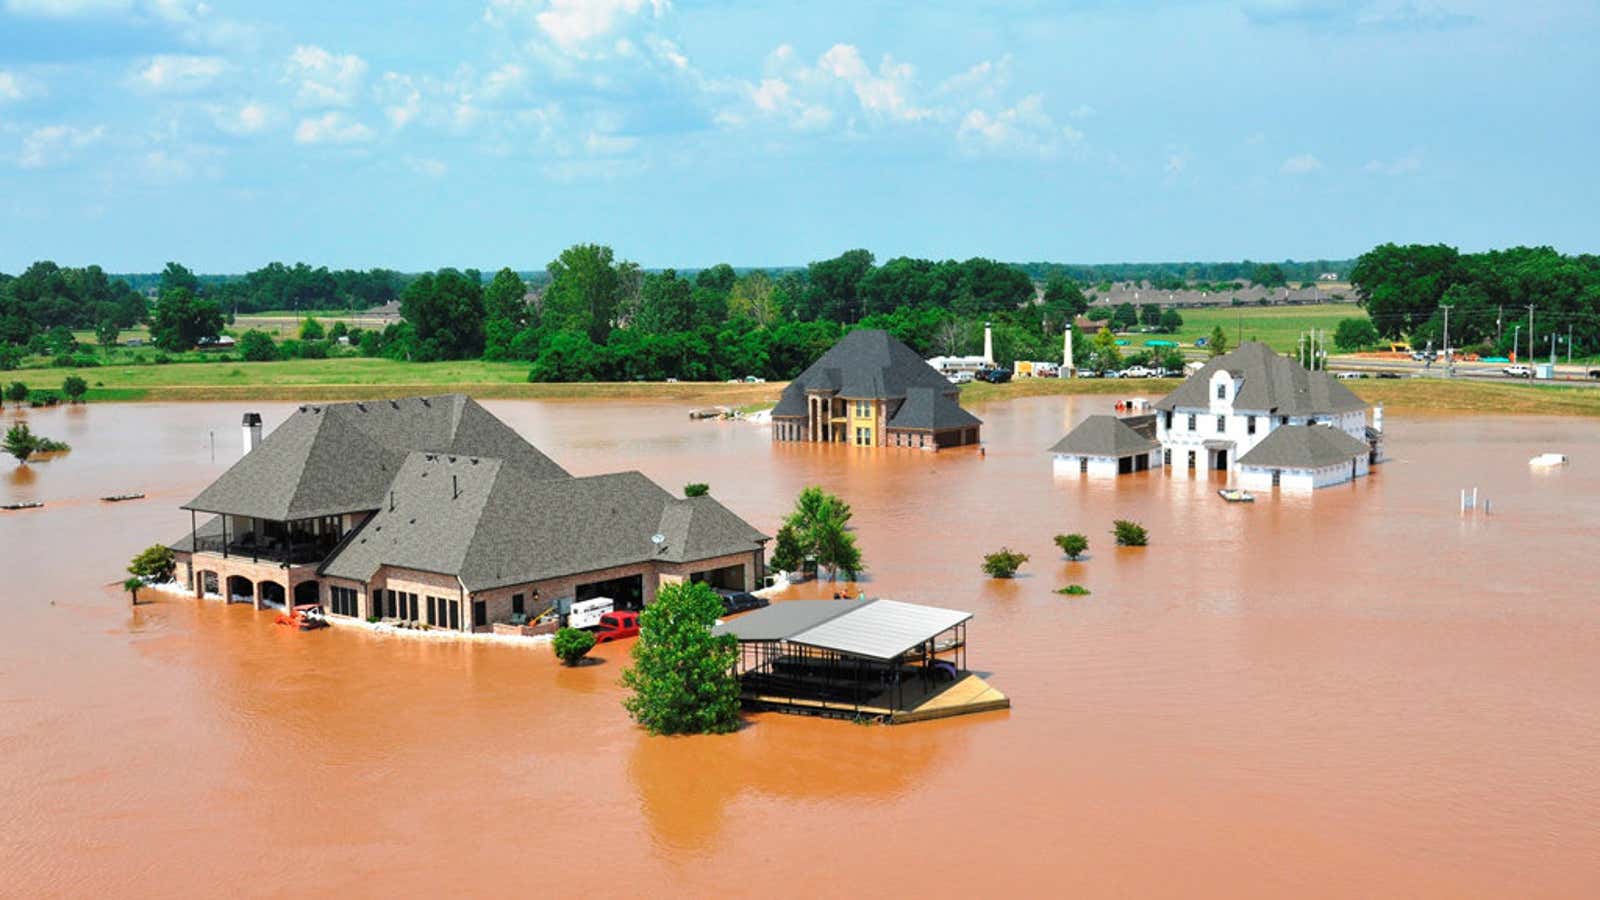 Flood-zone coverage is one of the few paths to financial recovery.